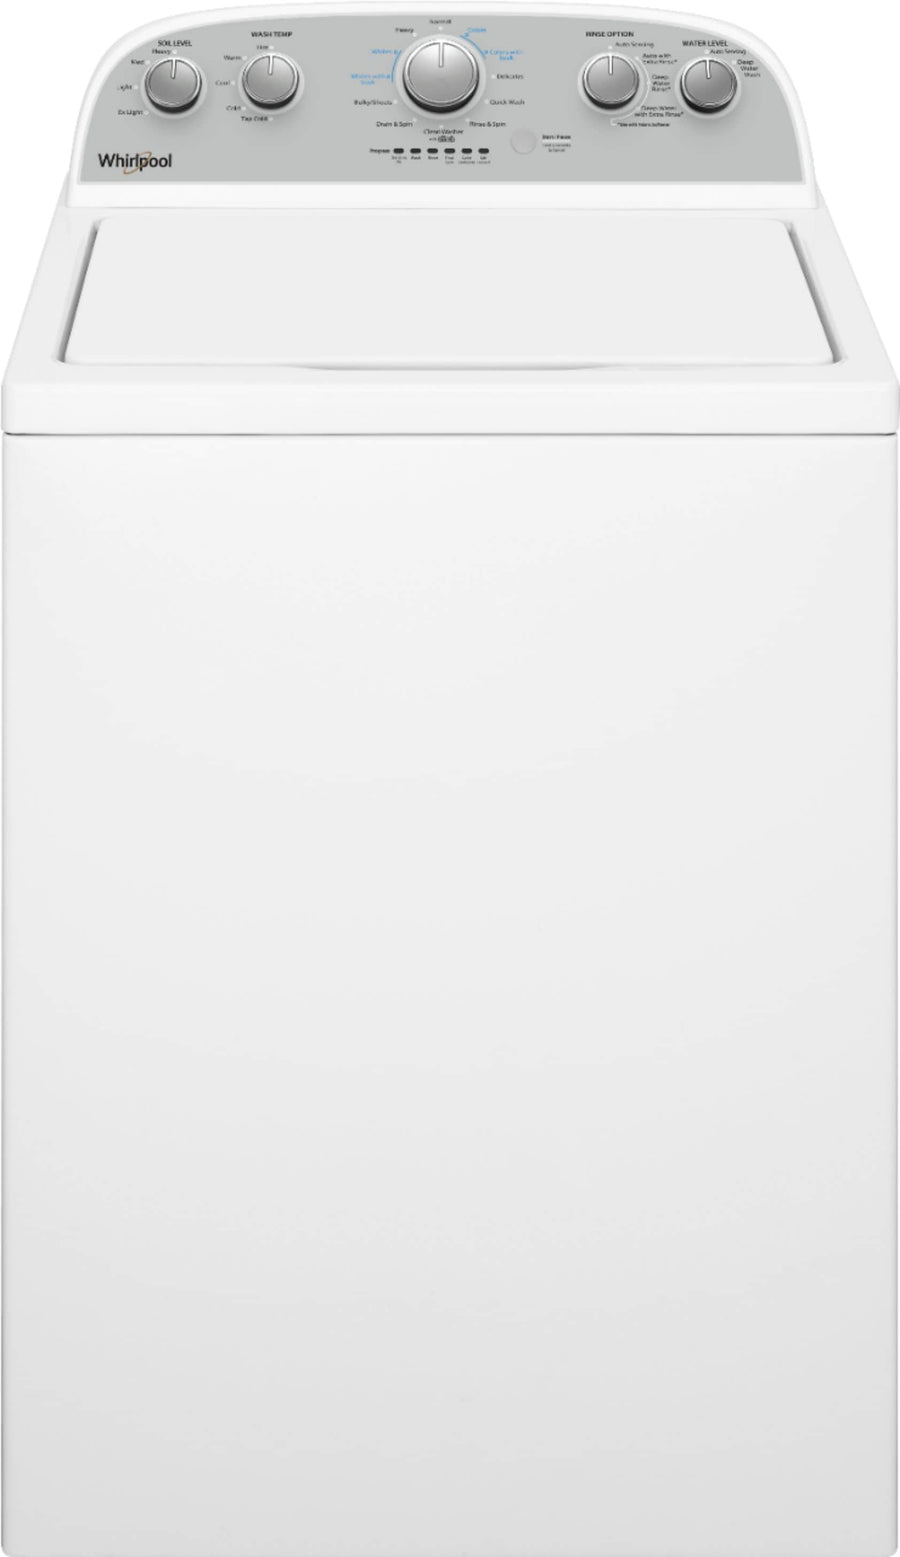 Whirlpool - 3.8 Cu. Ft. High Efficiency Top Load Washer with 360 Wash Agitator - White_0